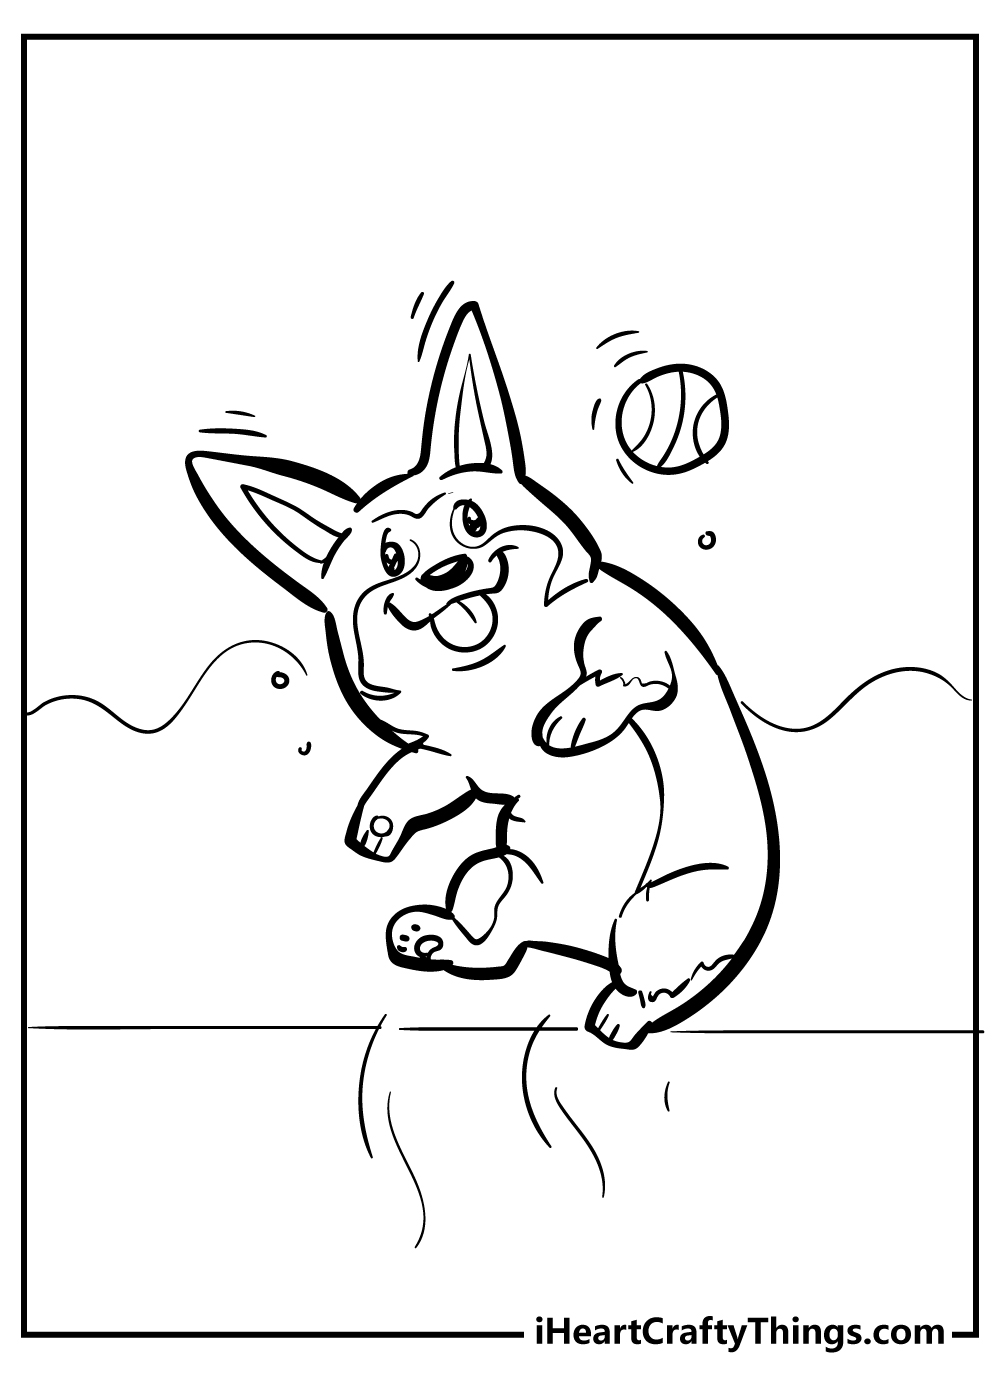 Corgi Coloring Pages for preschoolers free printable